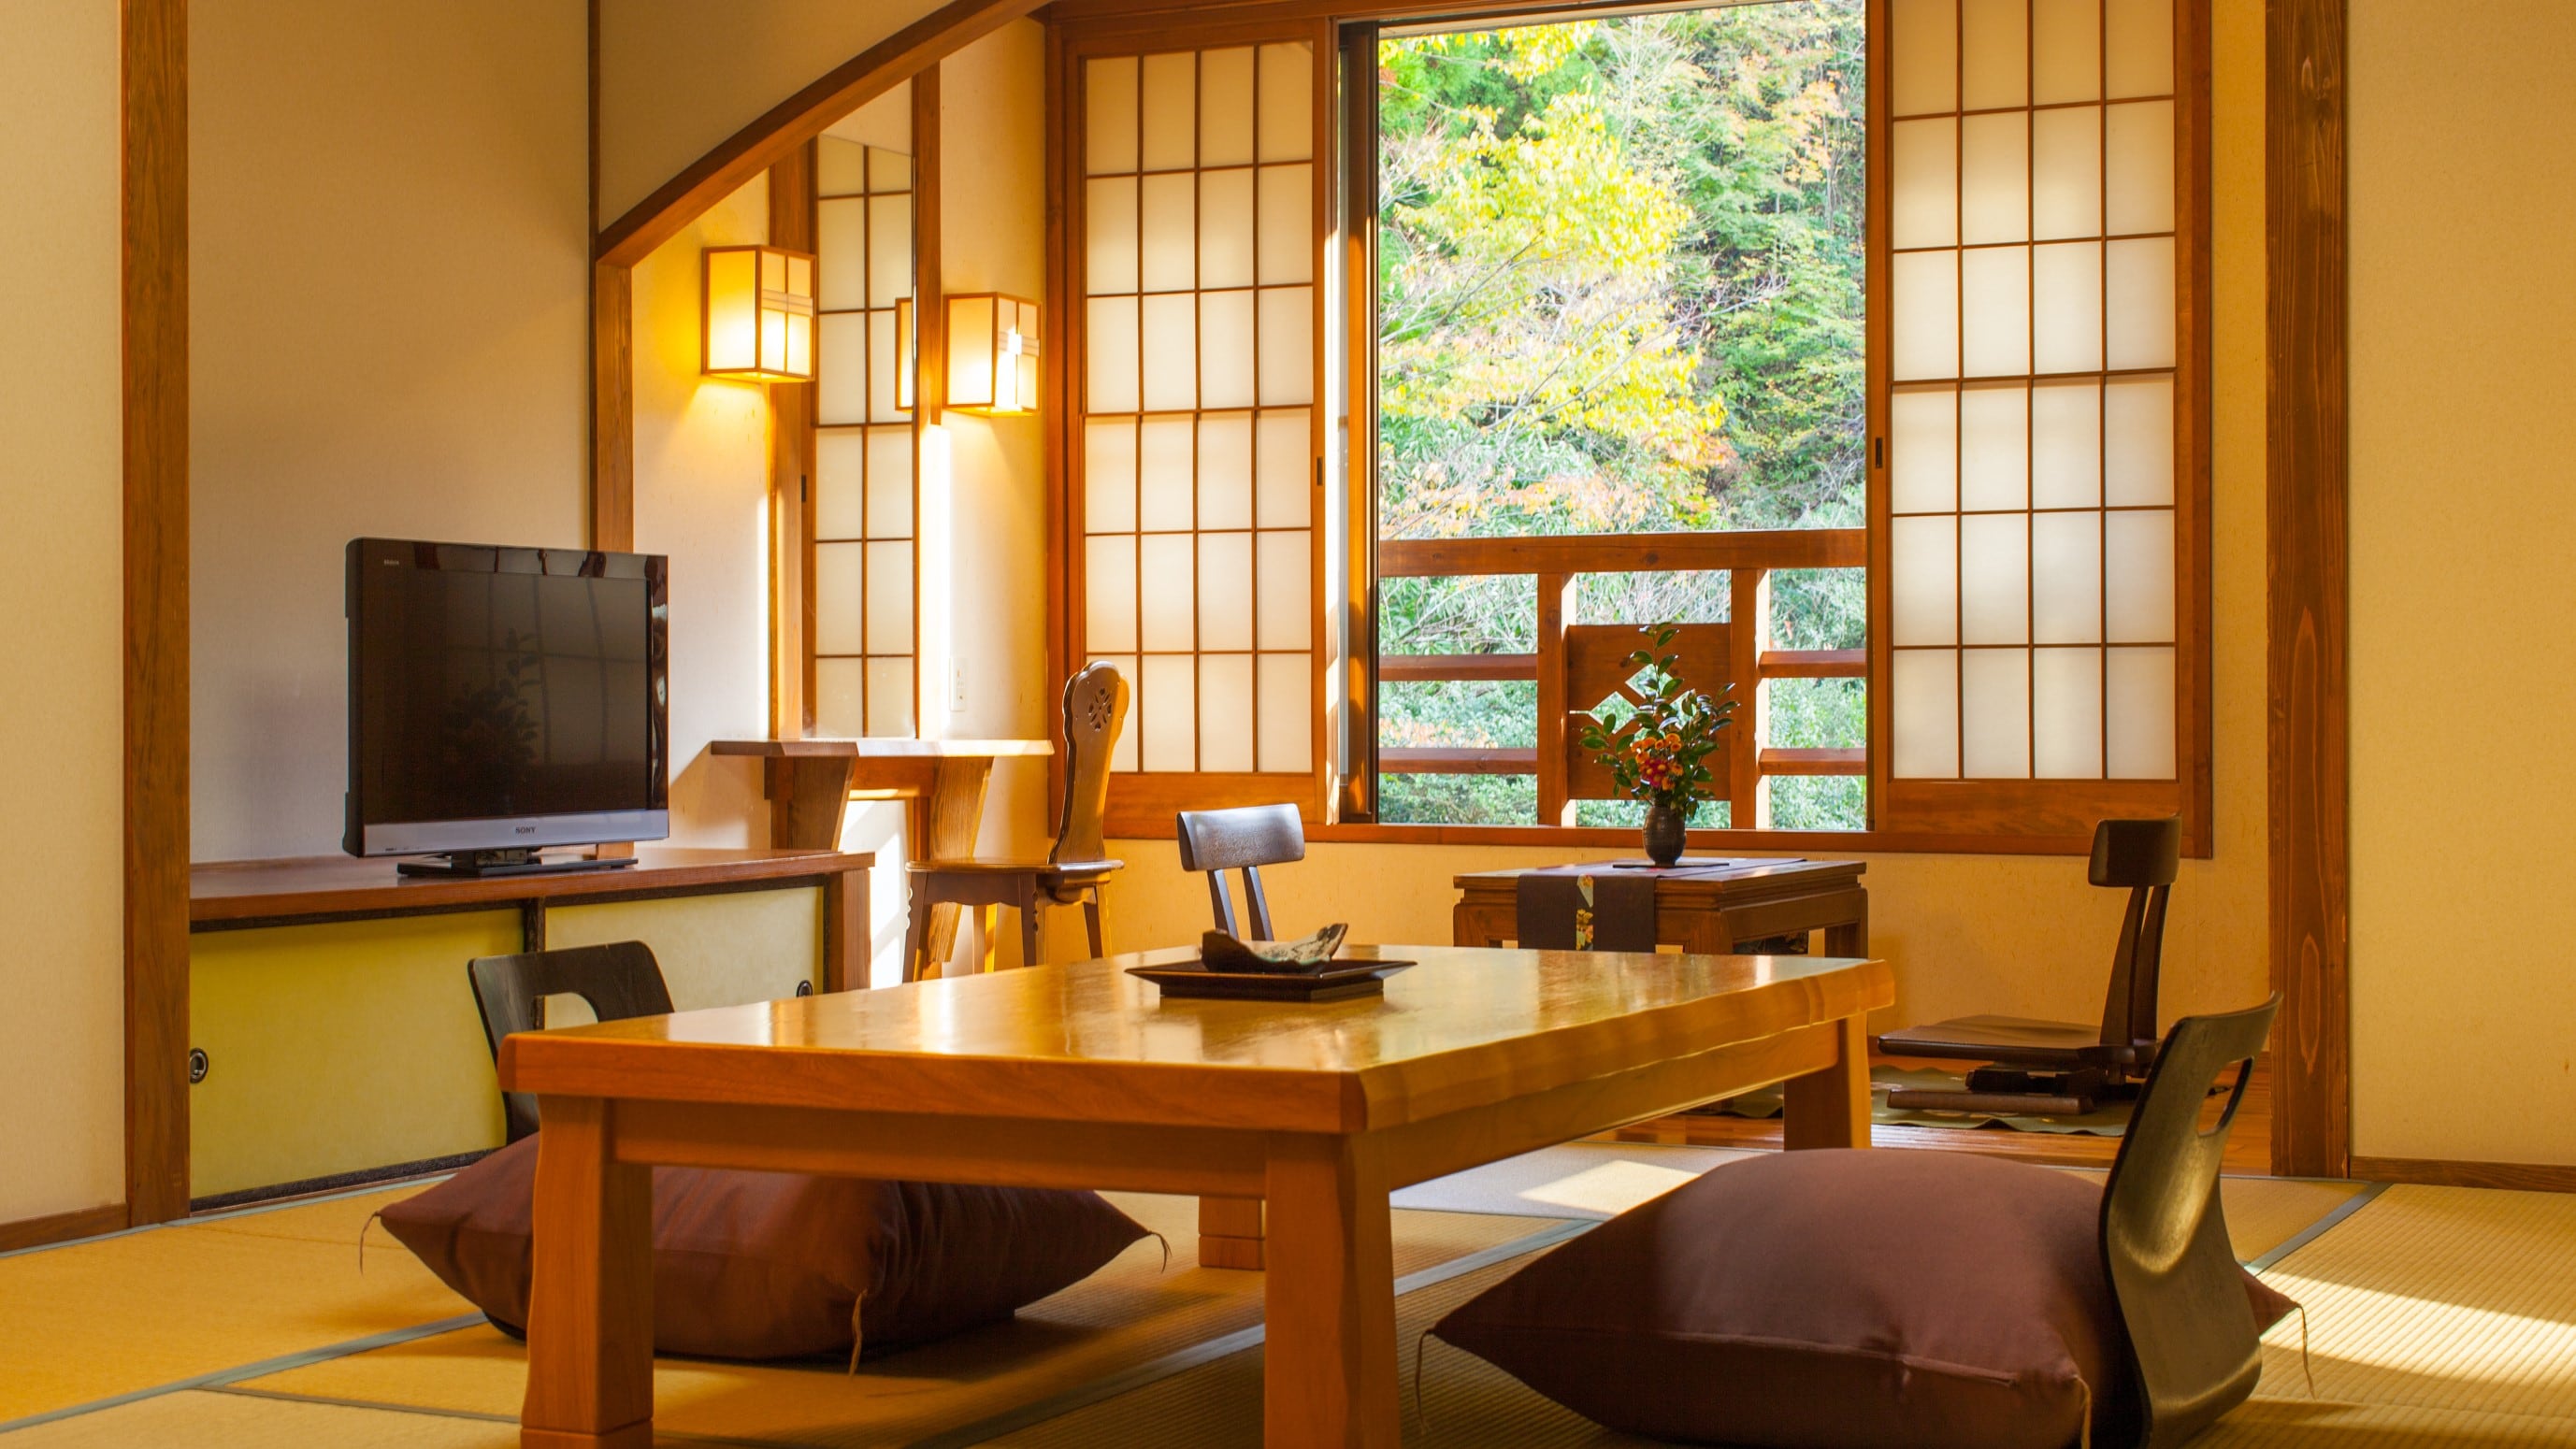 An example of a Japanese-style room with 10 tatami mats. This type has 4 rooms.